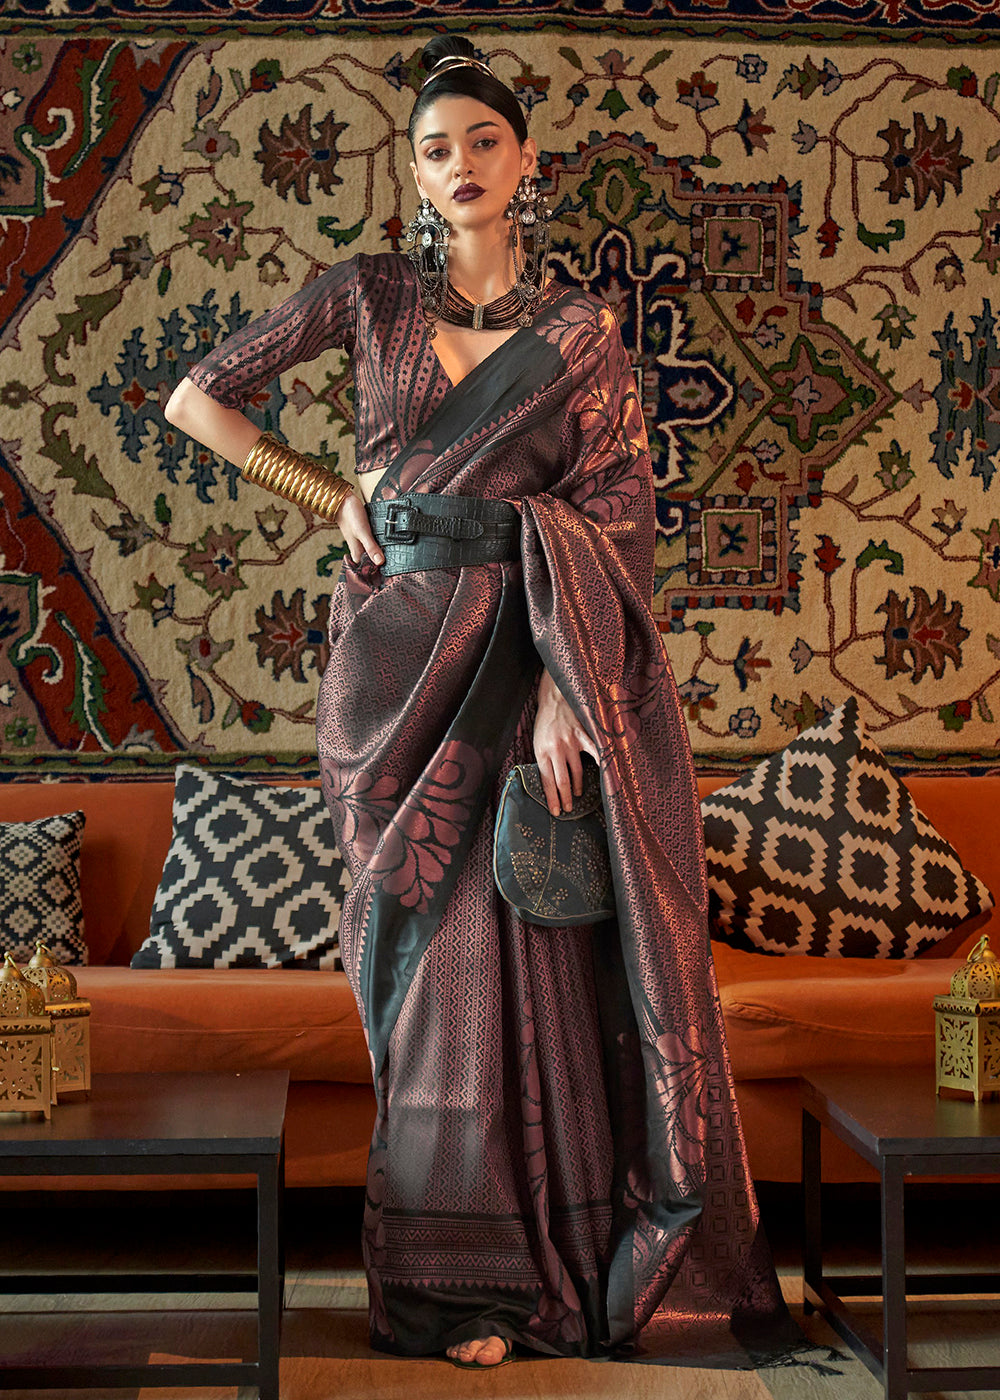 Buy Now Classic Black Blended Woven Zari Brocade Silk Saree Online in USA, UK, Canada & Worldwide at Empress Clothing.